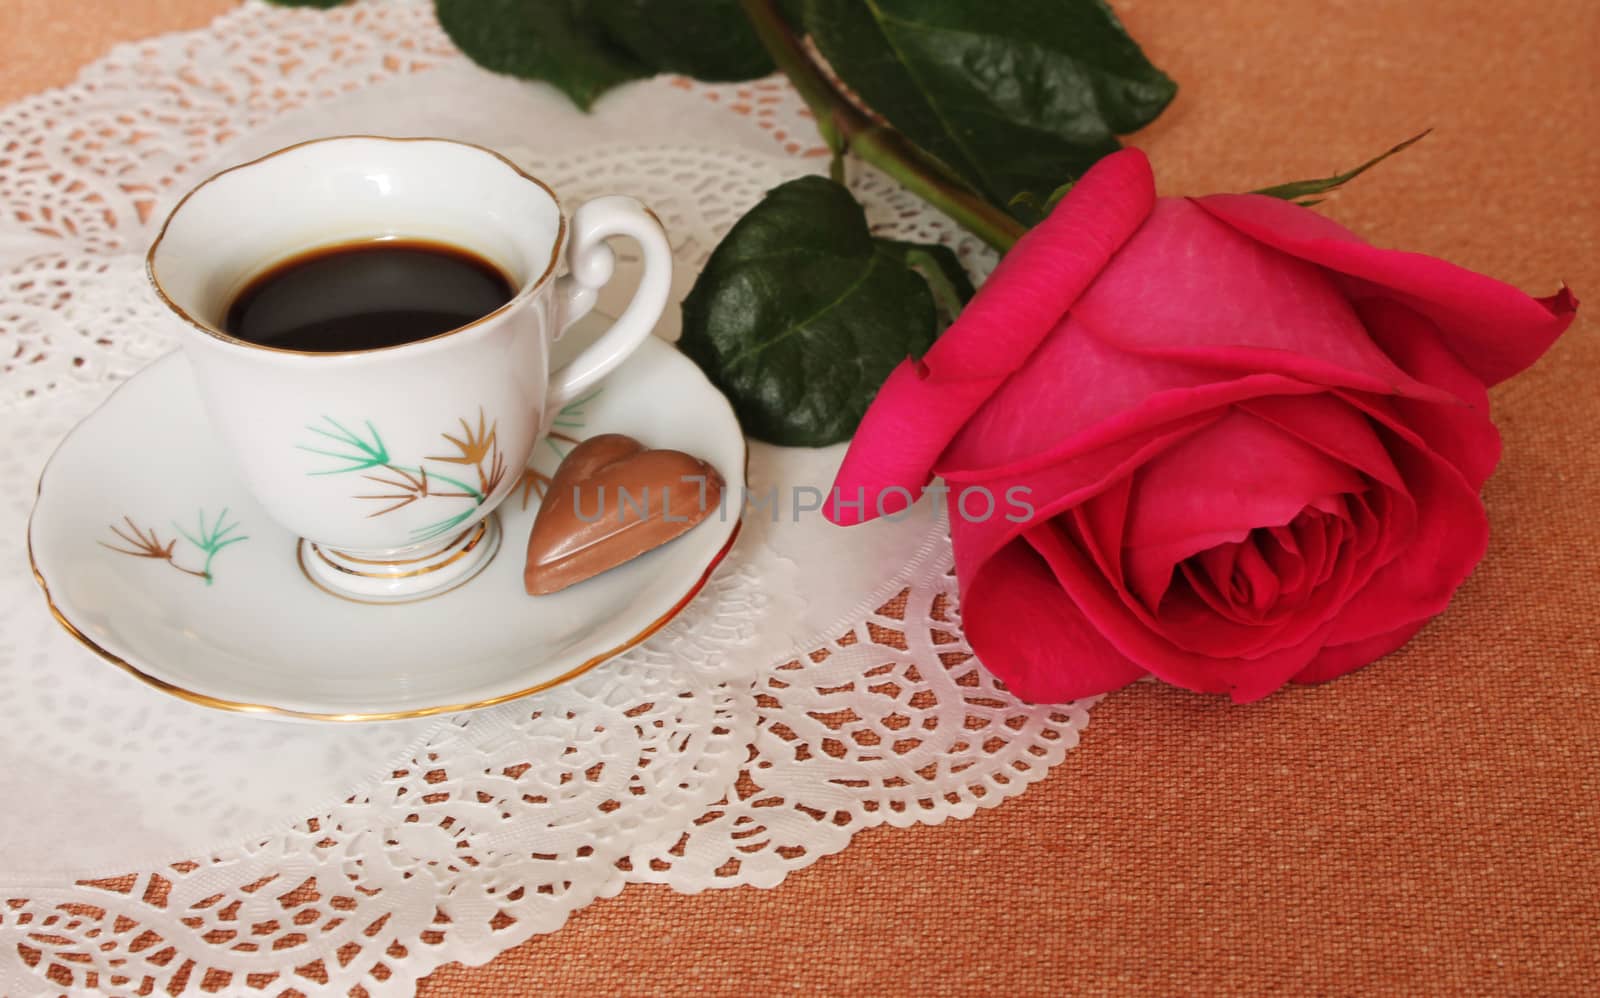 Still Life with cup of coffee and a pink rose on a lace salfete